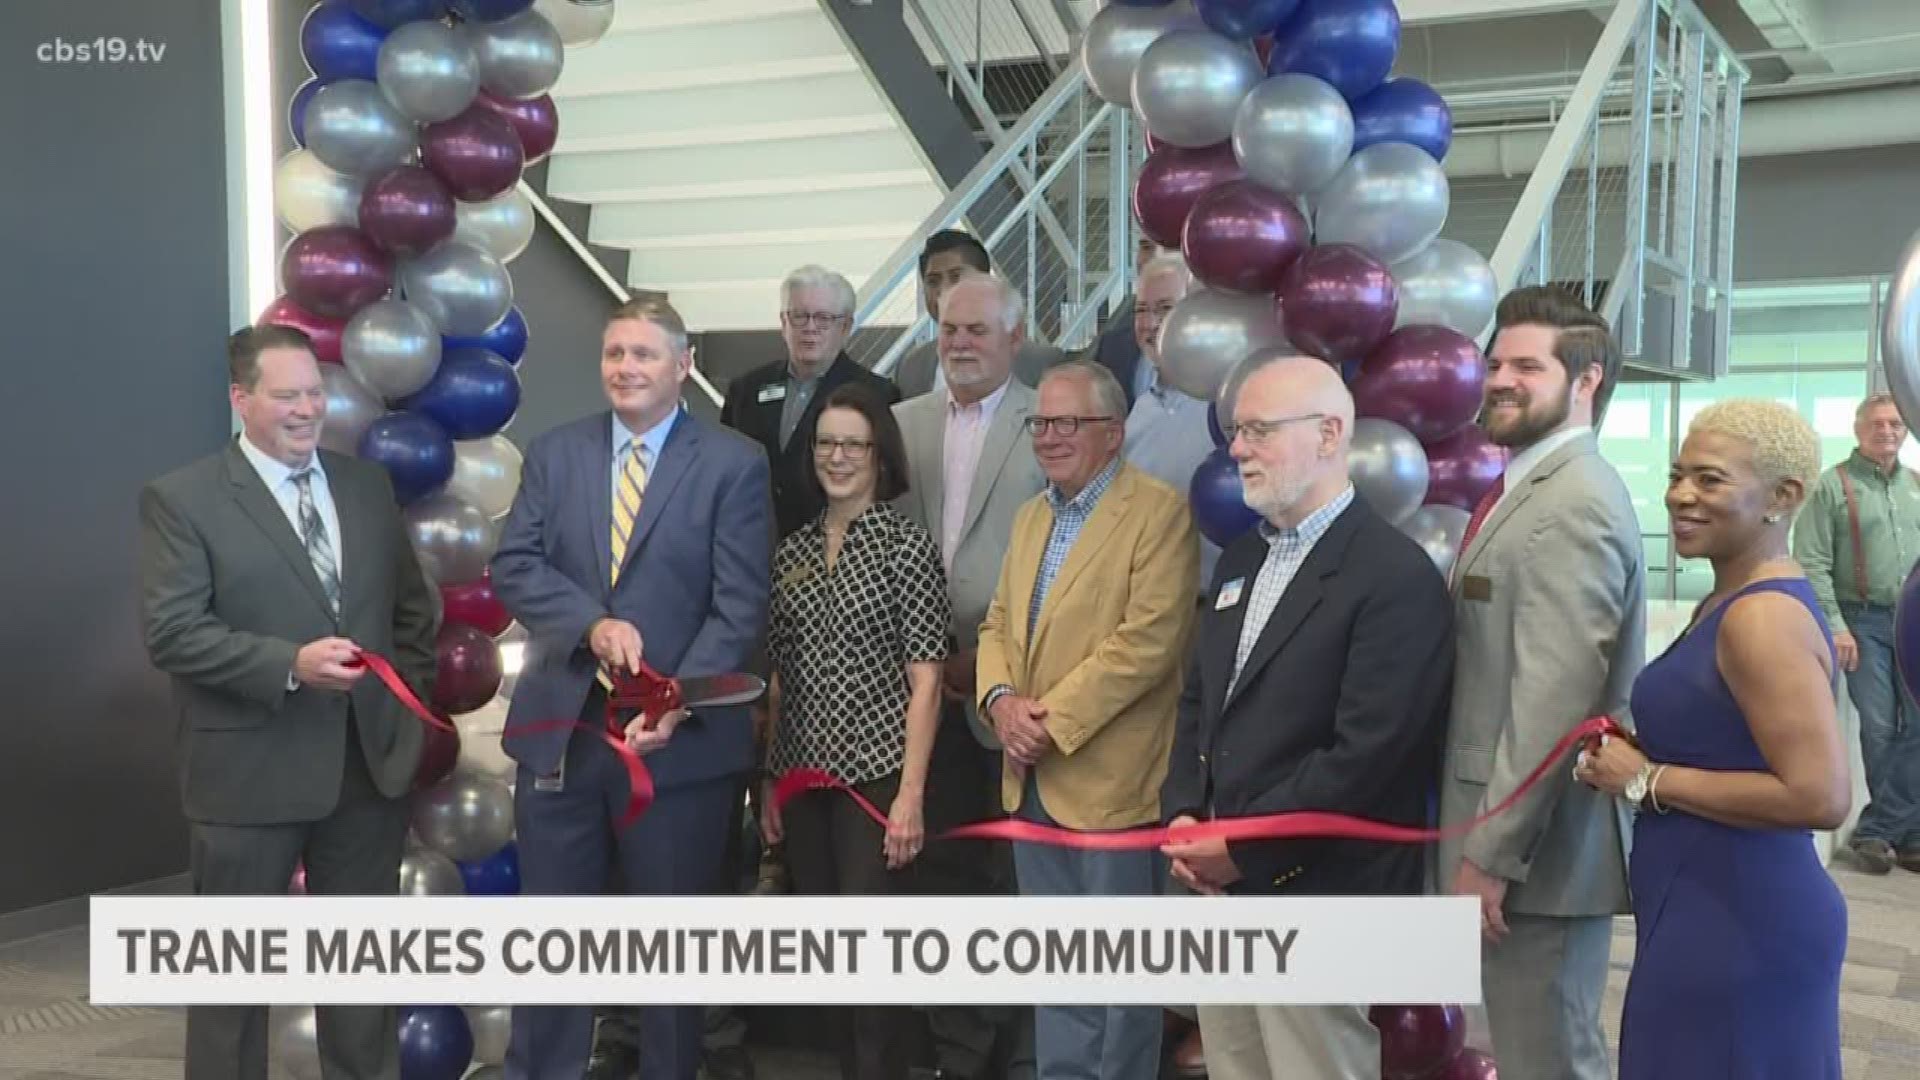 Trane held a ceremony at its newly renovated building to show its commitment to the community extending beyond appearances.